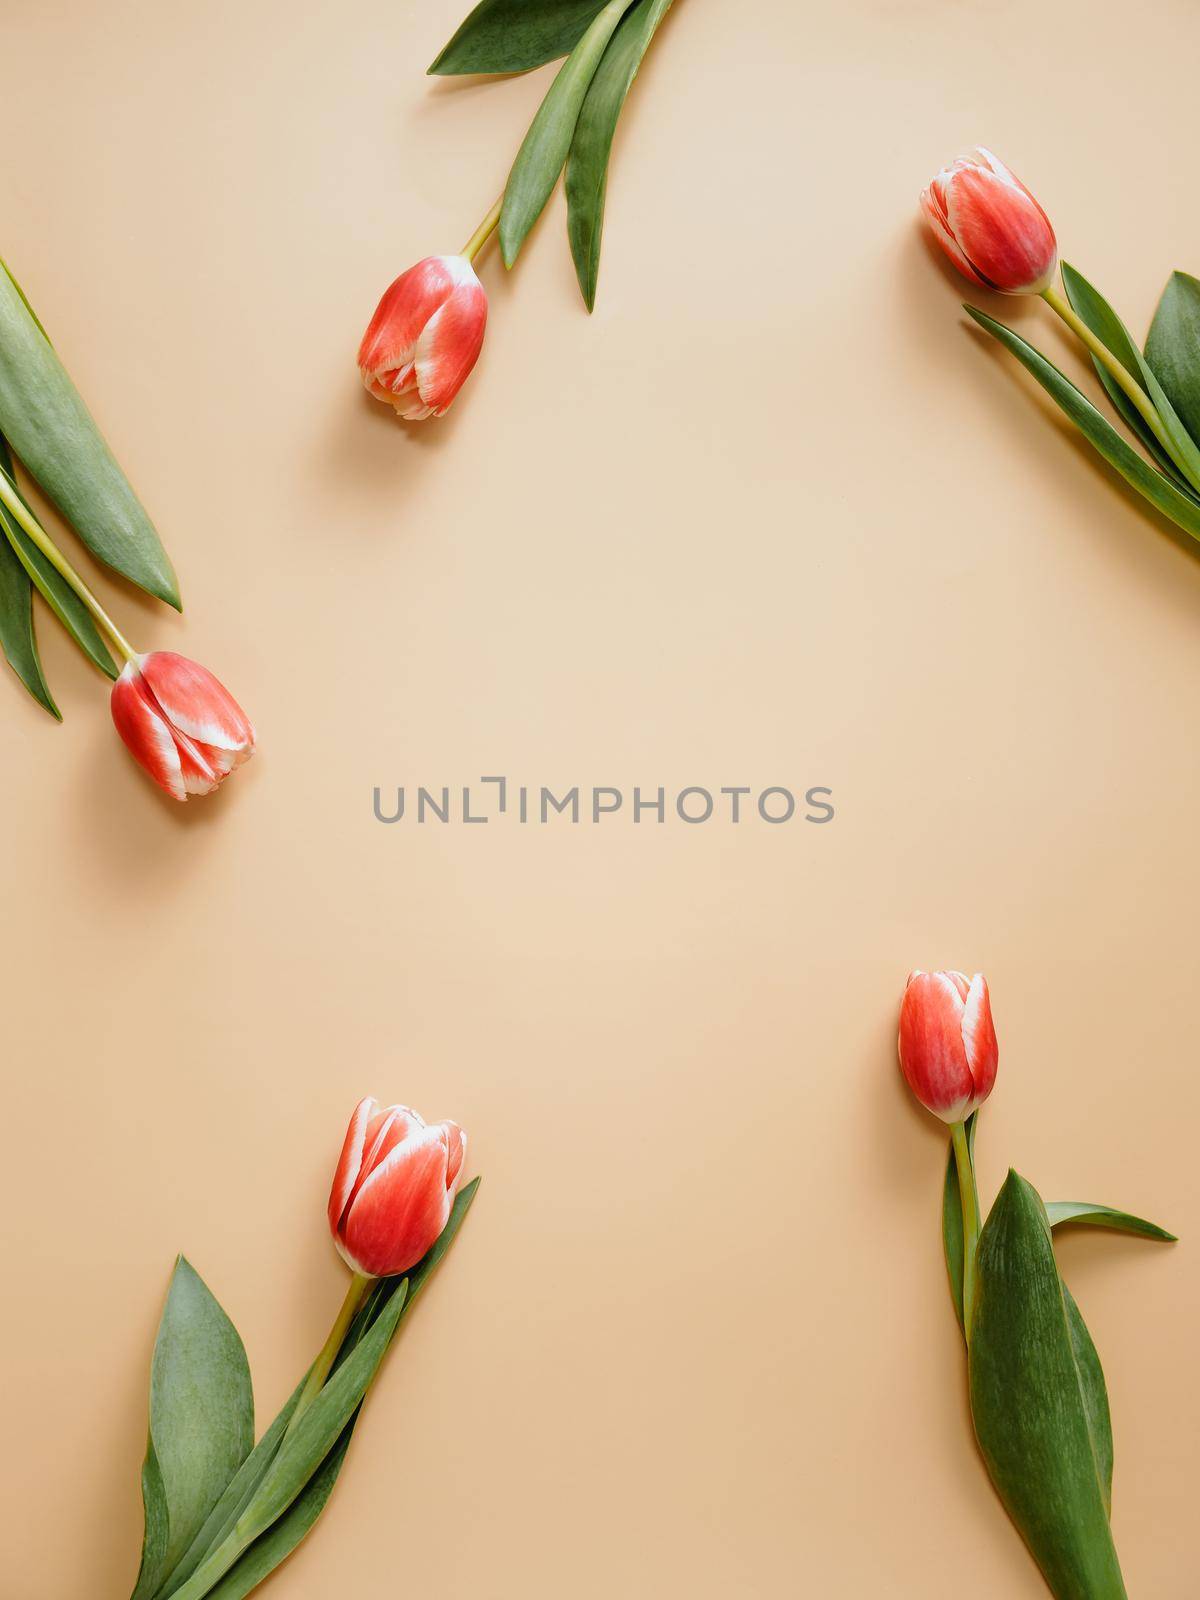 Aesthetic background with red tulips on beige champagne background. Vertical image of perfect tulips with copy space for text in center. Spring flowers. Sell tulips. Spring mood. Top view or flat lay